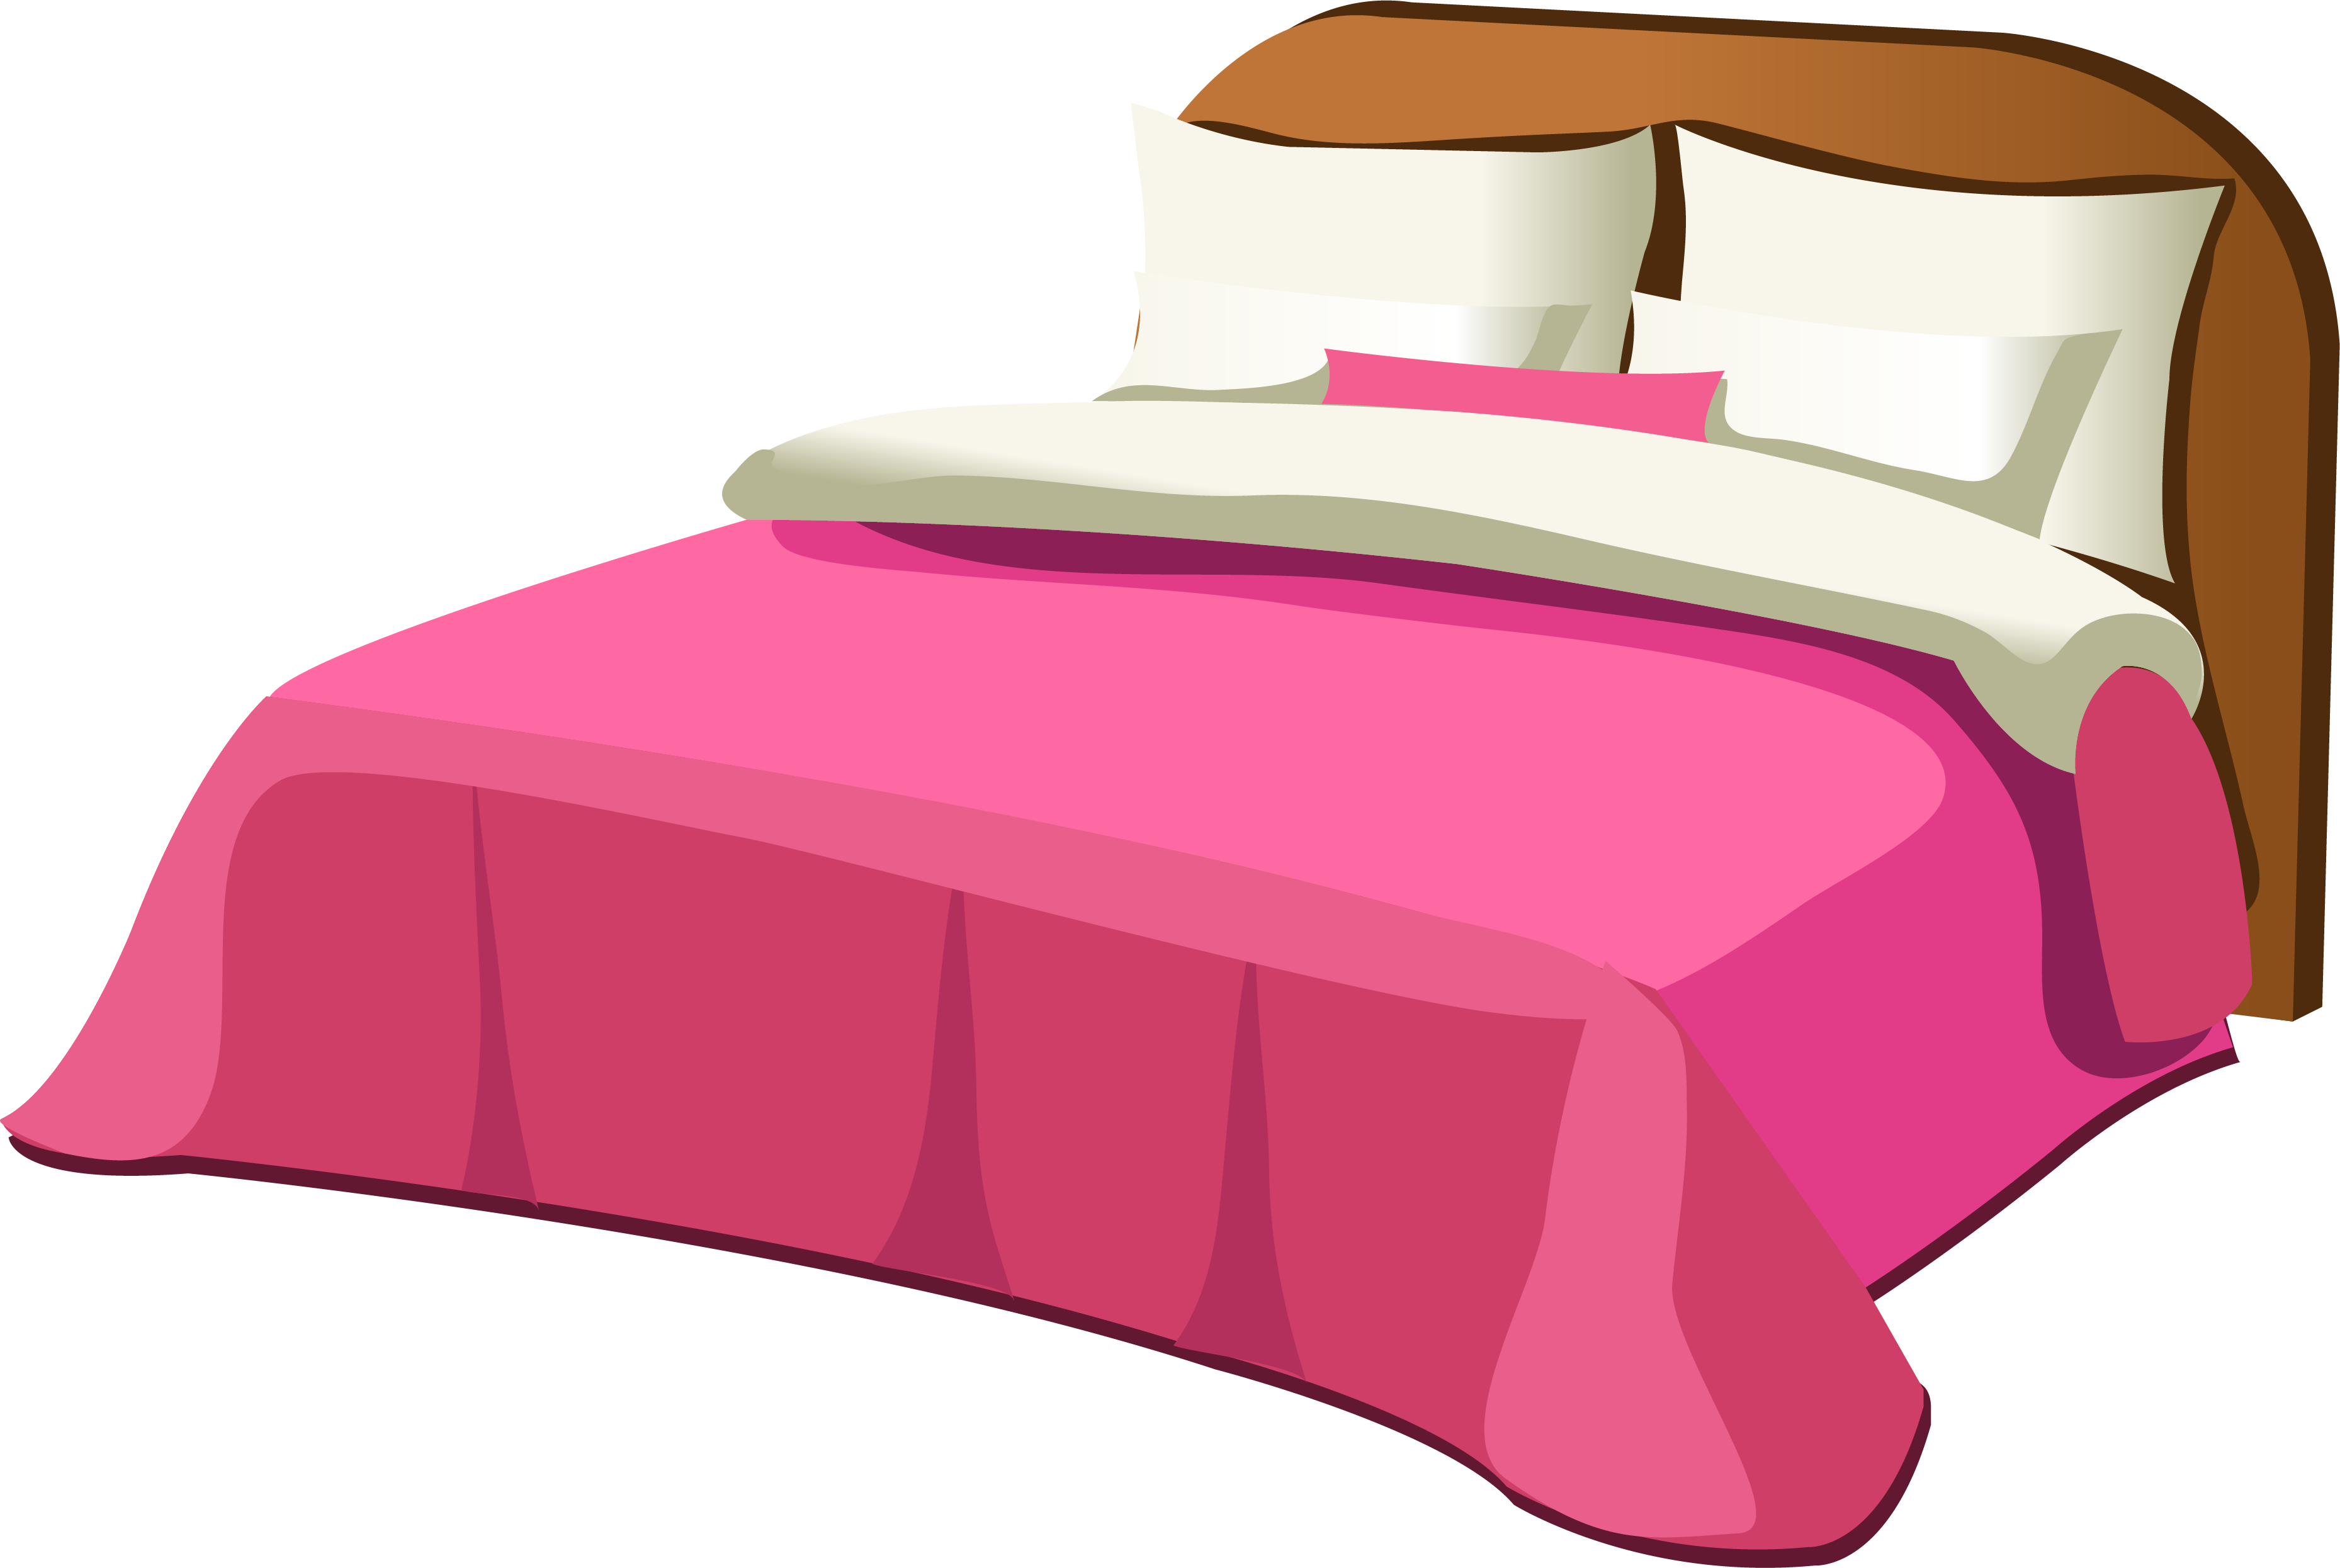 Cute Bed Cartoon Png Tons of awesome cute cartoon wallpapers to ...